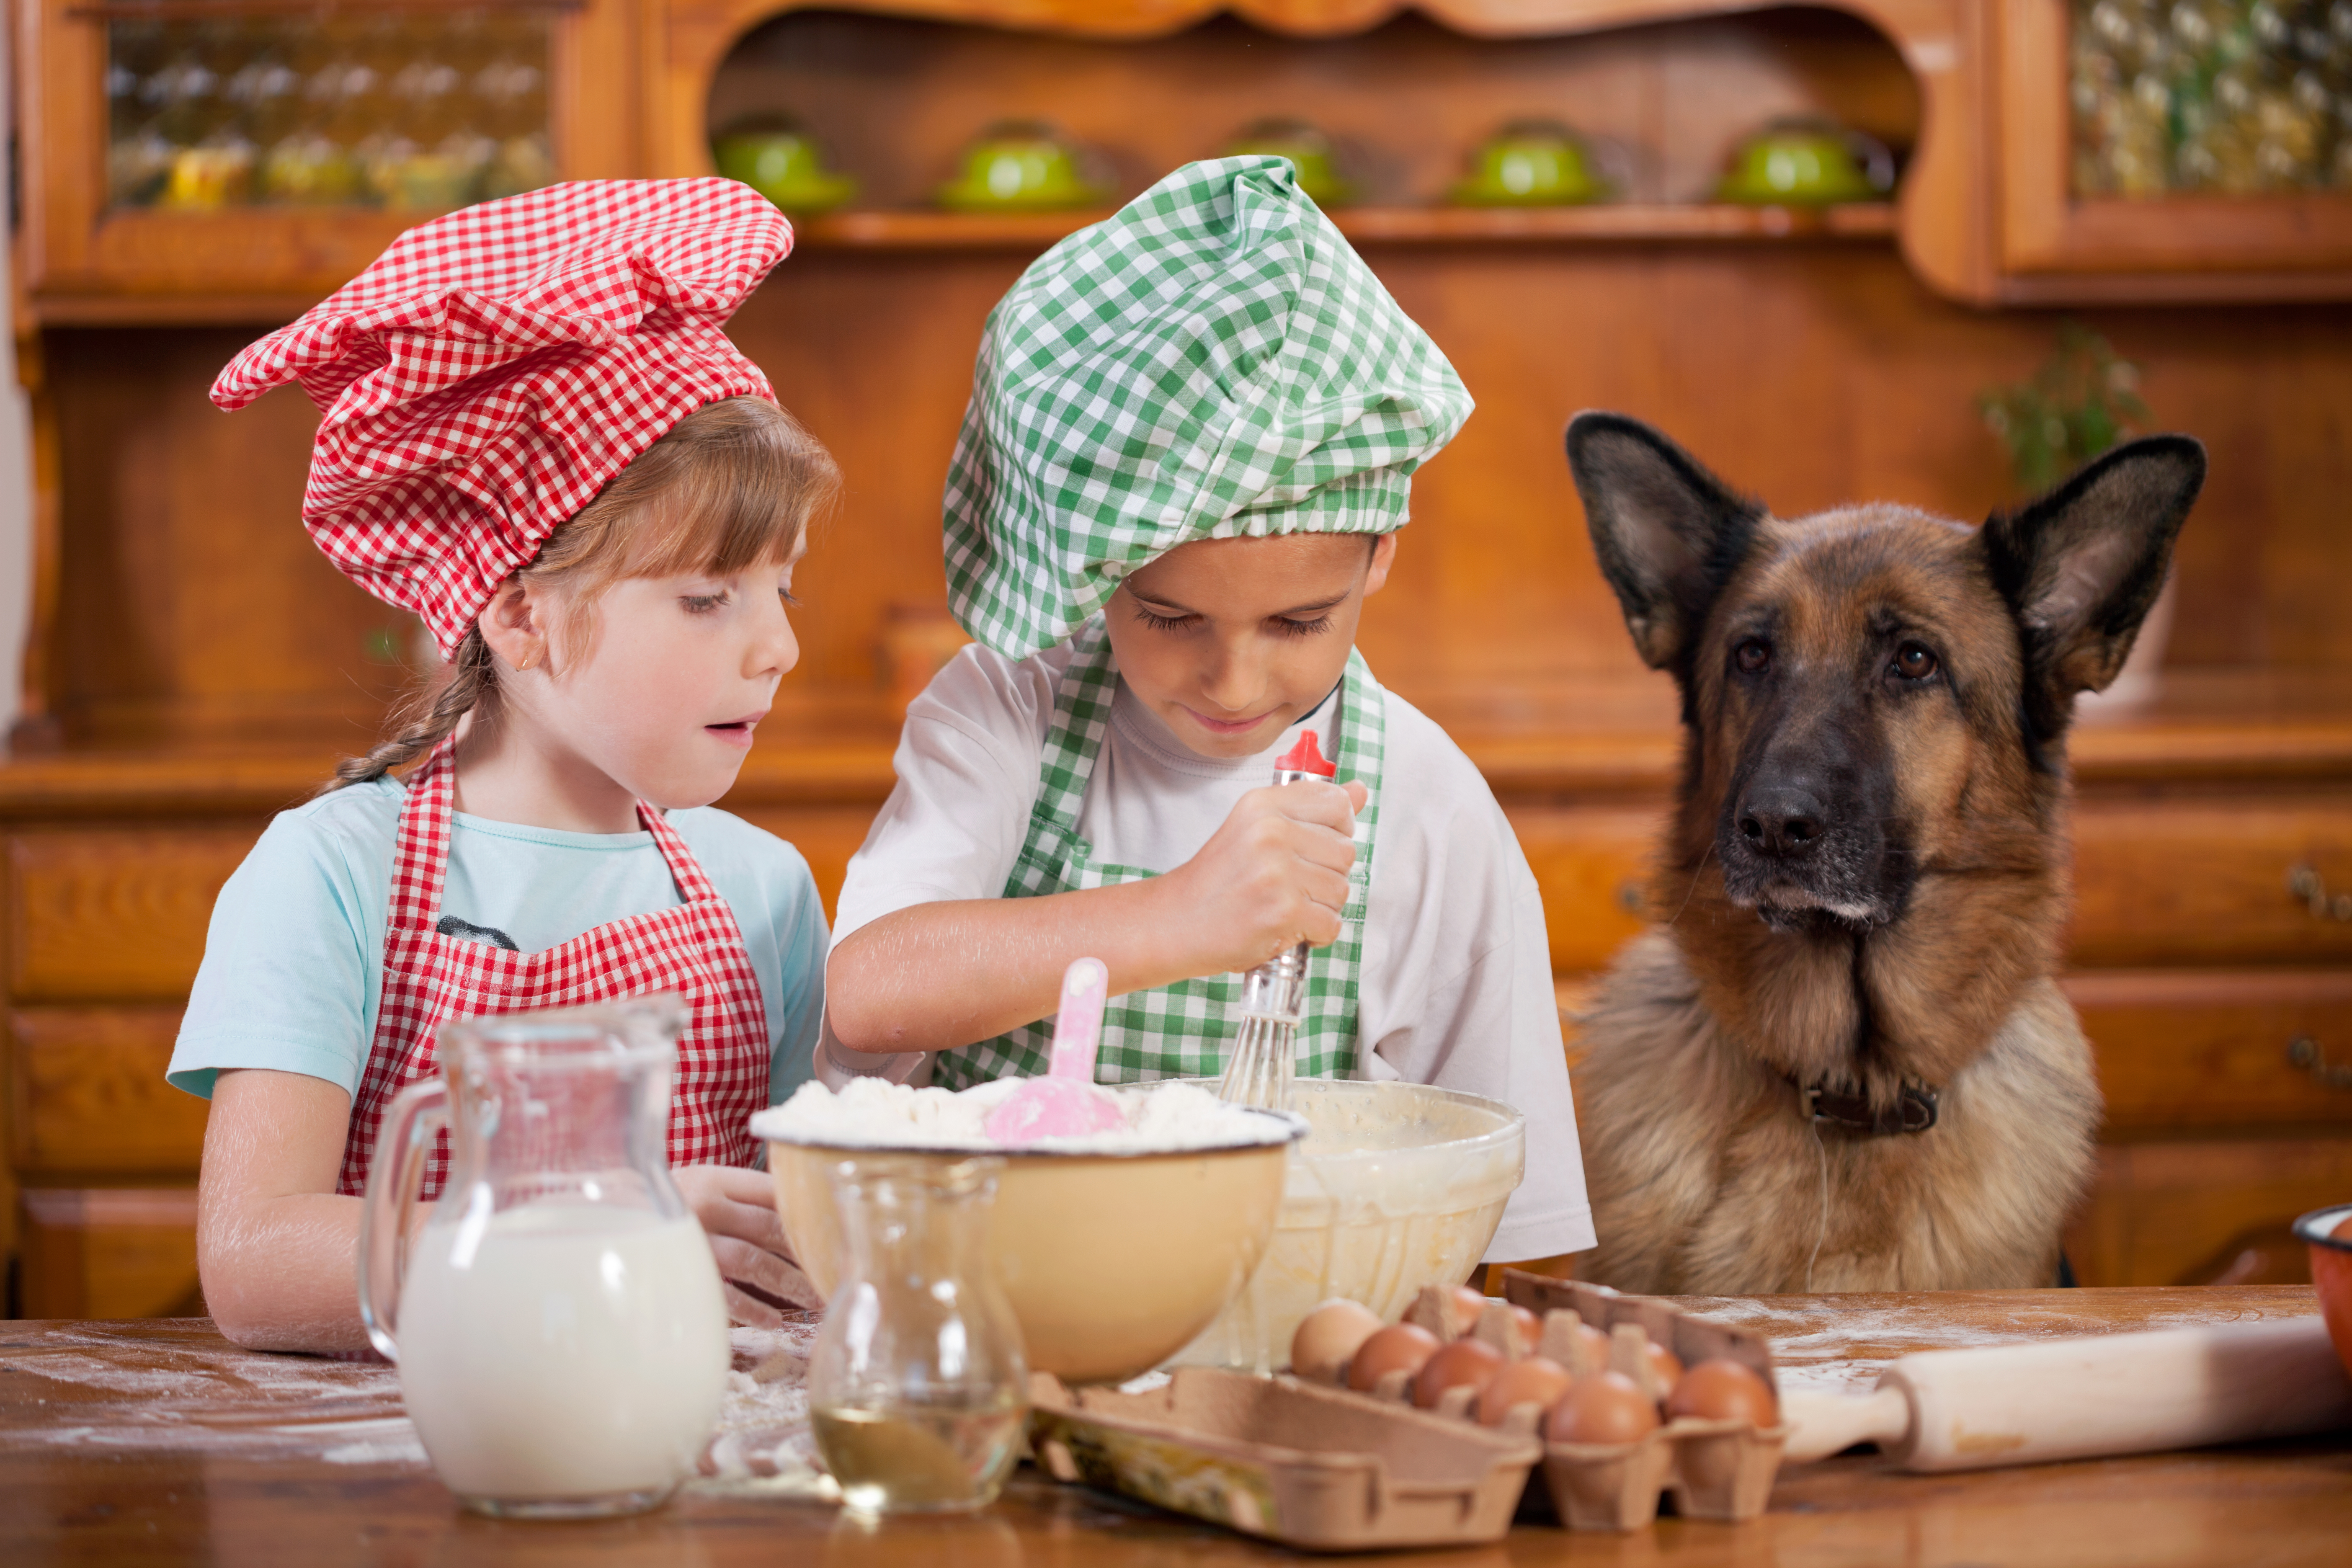 Two young girls, about 5 or 6 years old, are in the kitchen baking. Beside them, sitting quietly and watching on is an adult german shepherd.